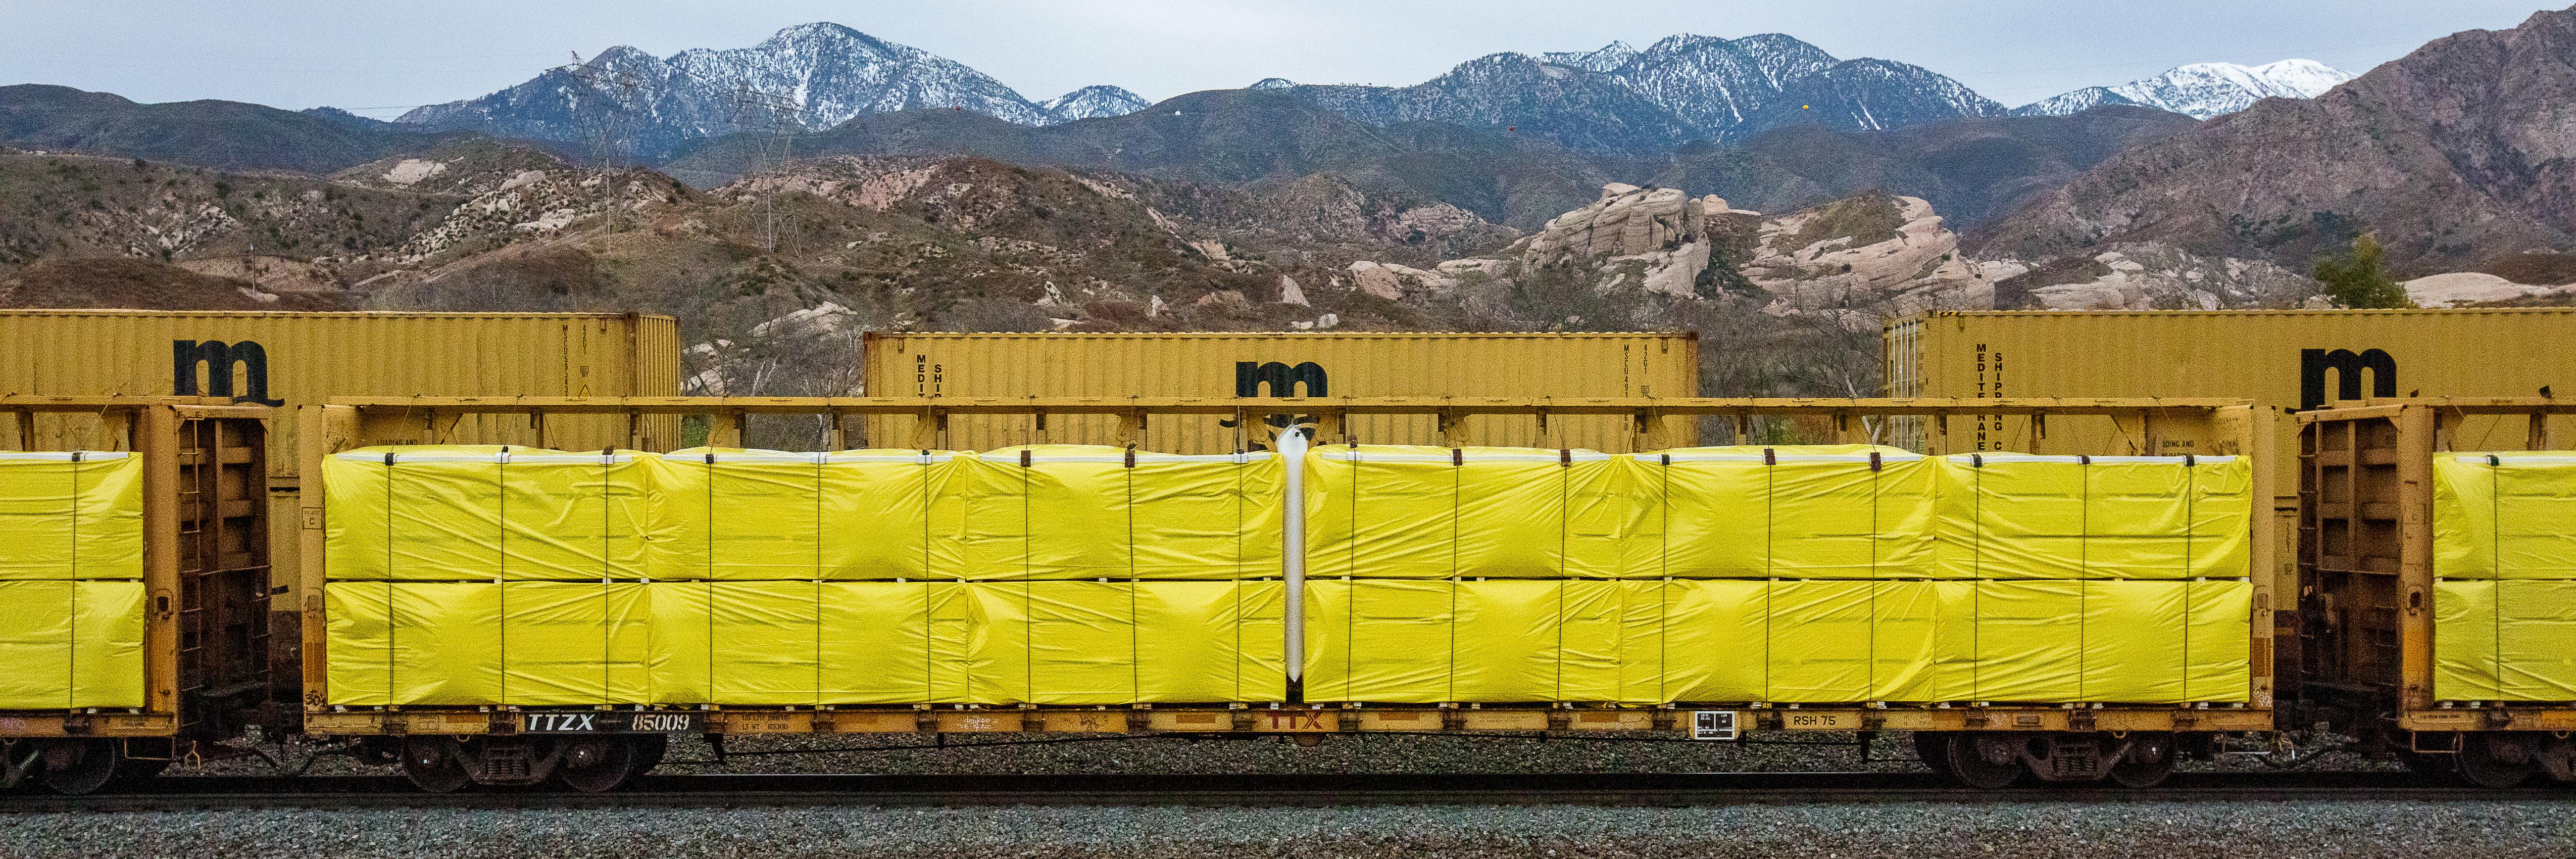 Stephen Mallon Color Photograph -  "TTZX 85009" 20"x60" limited edition photograph (freight train in landscape)